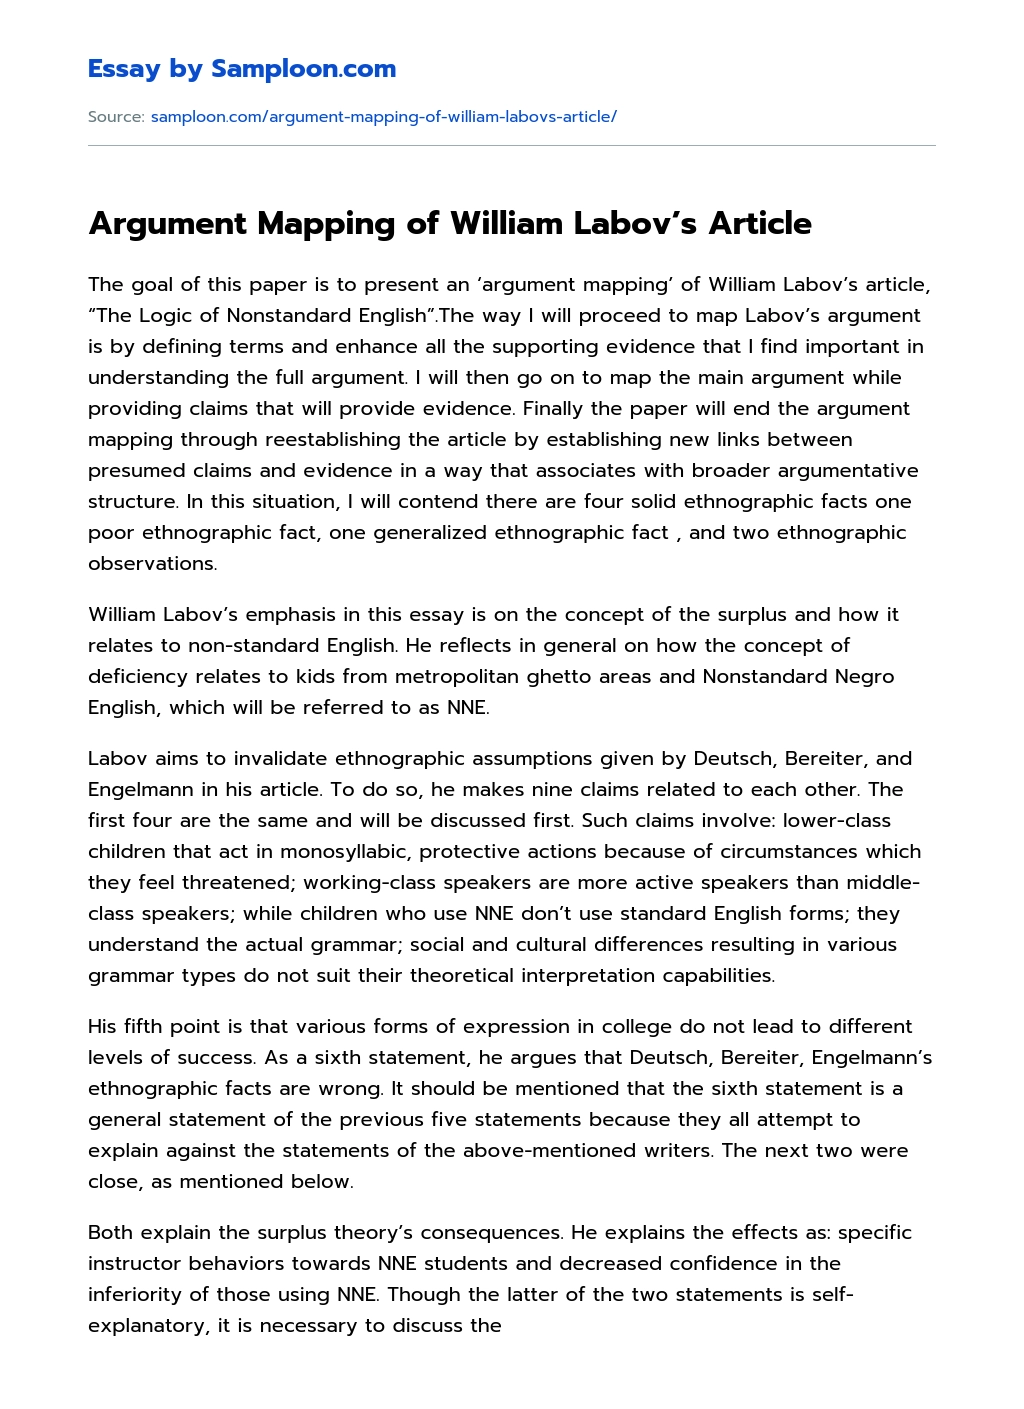 Argument Mapping of William Labov’s Article essay